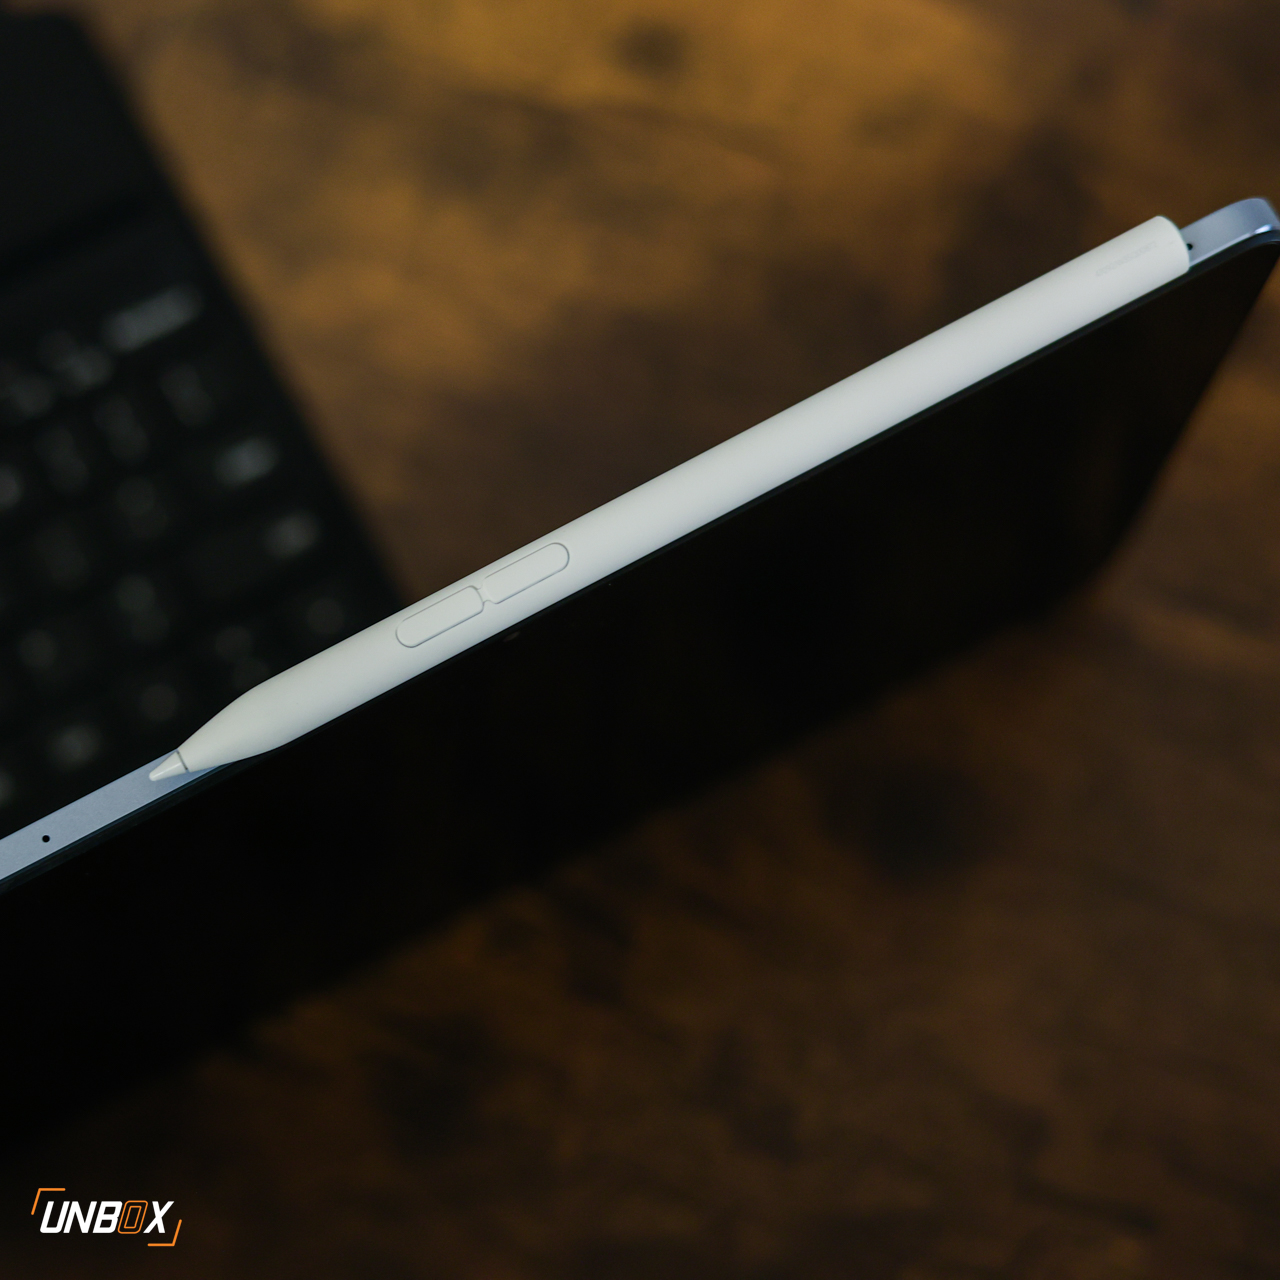 Xiaomi Pad 6 (artist review): Great tablet but pen has line